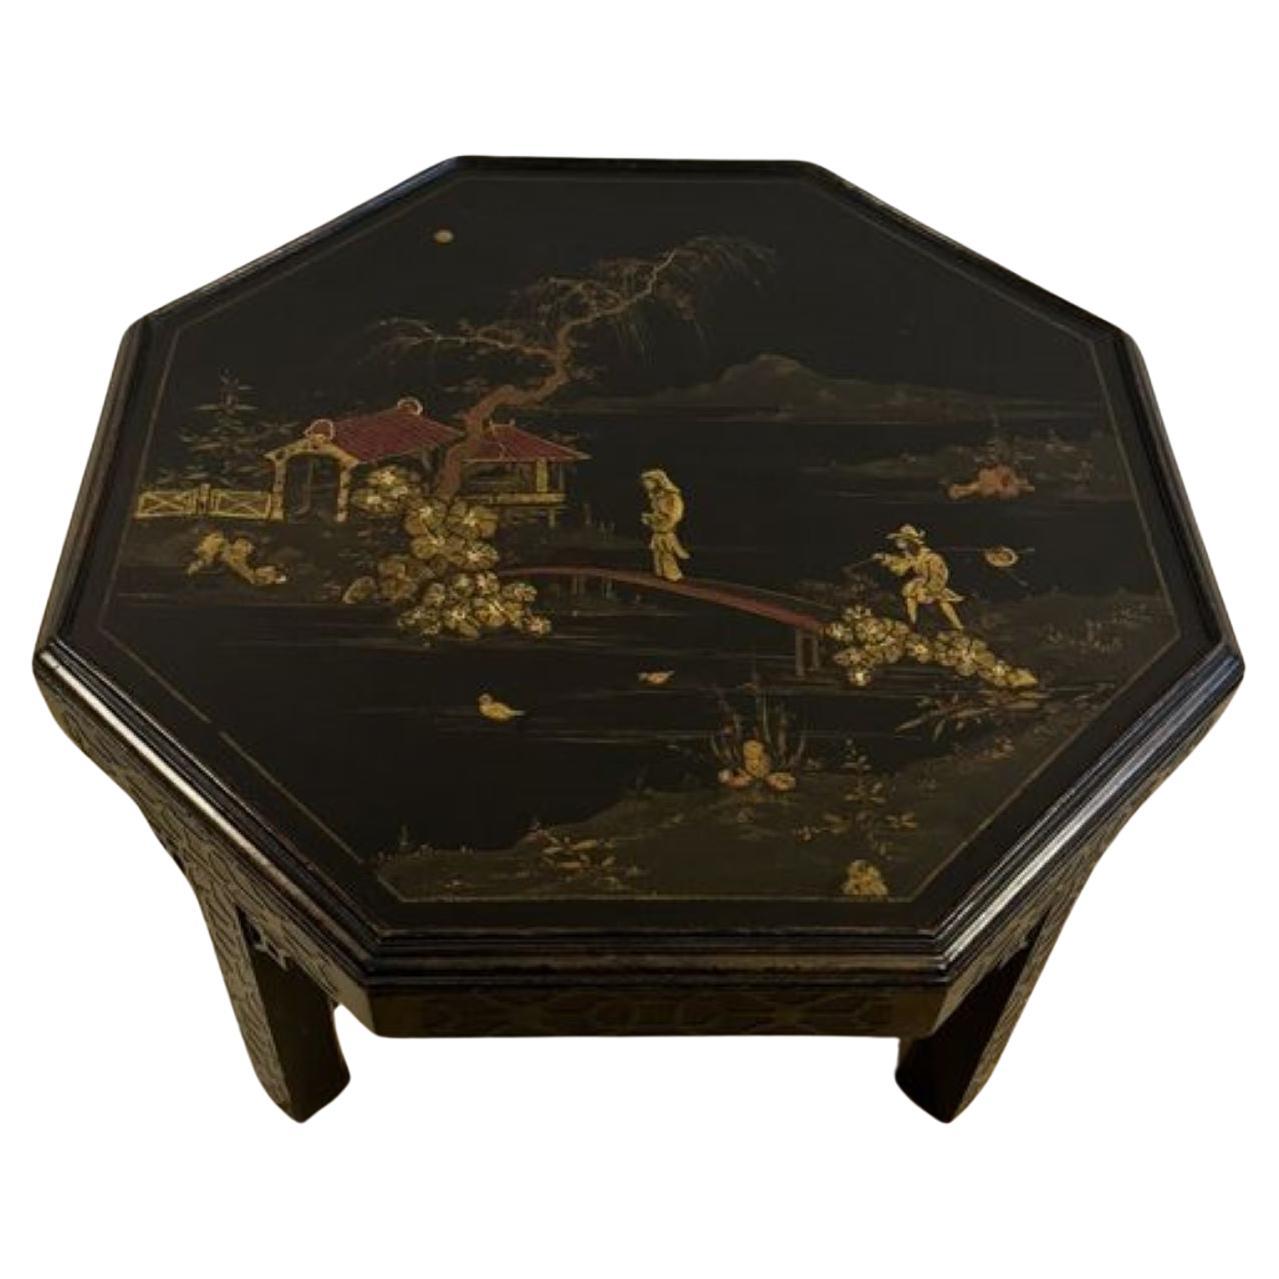 Wonderful quality antique Edwardian chinoiserie decorated coffee table 